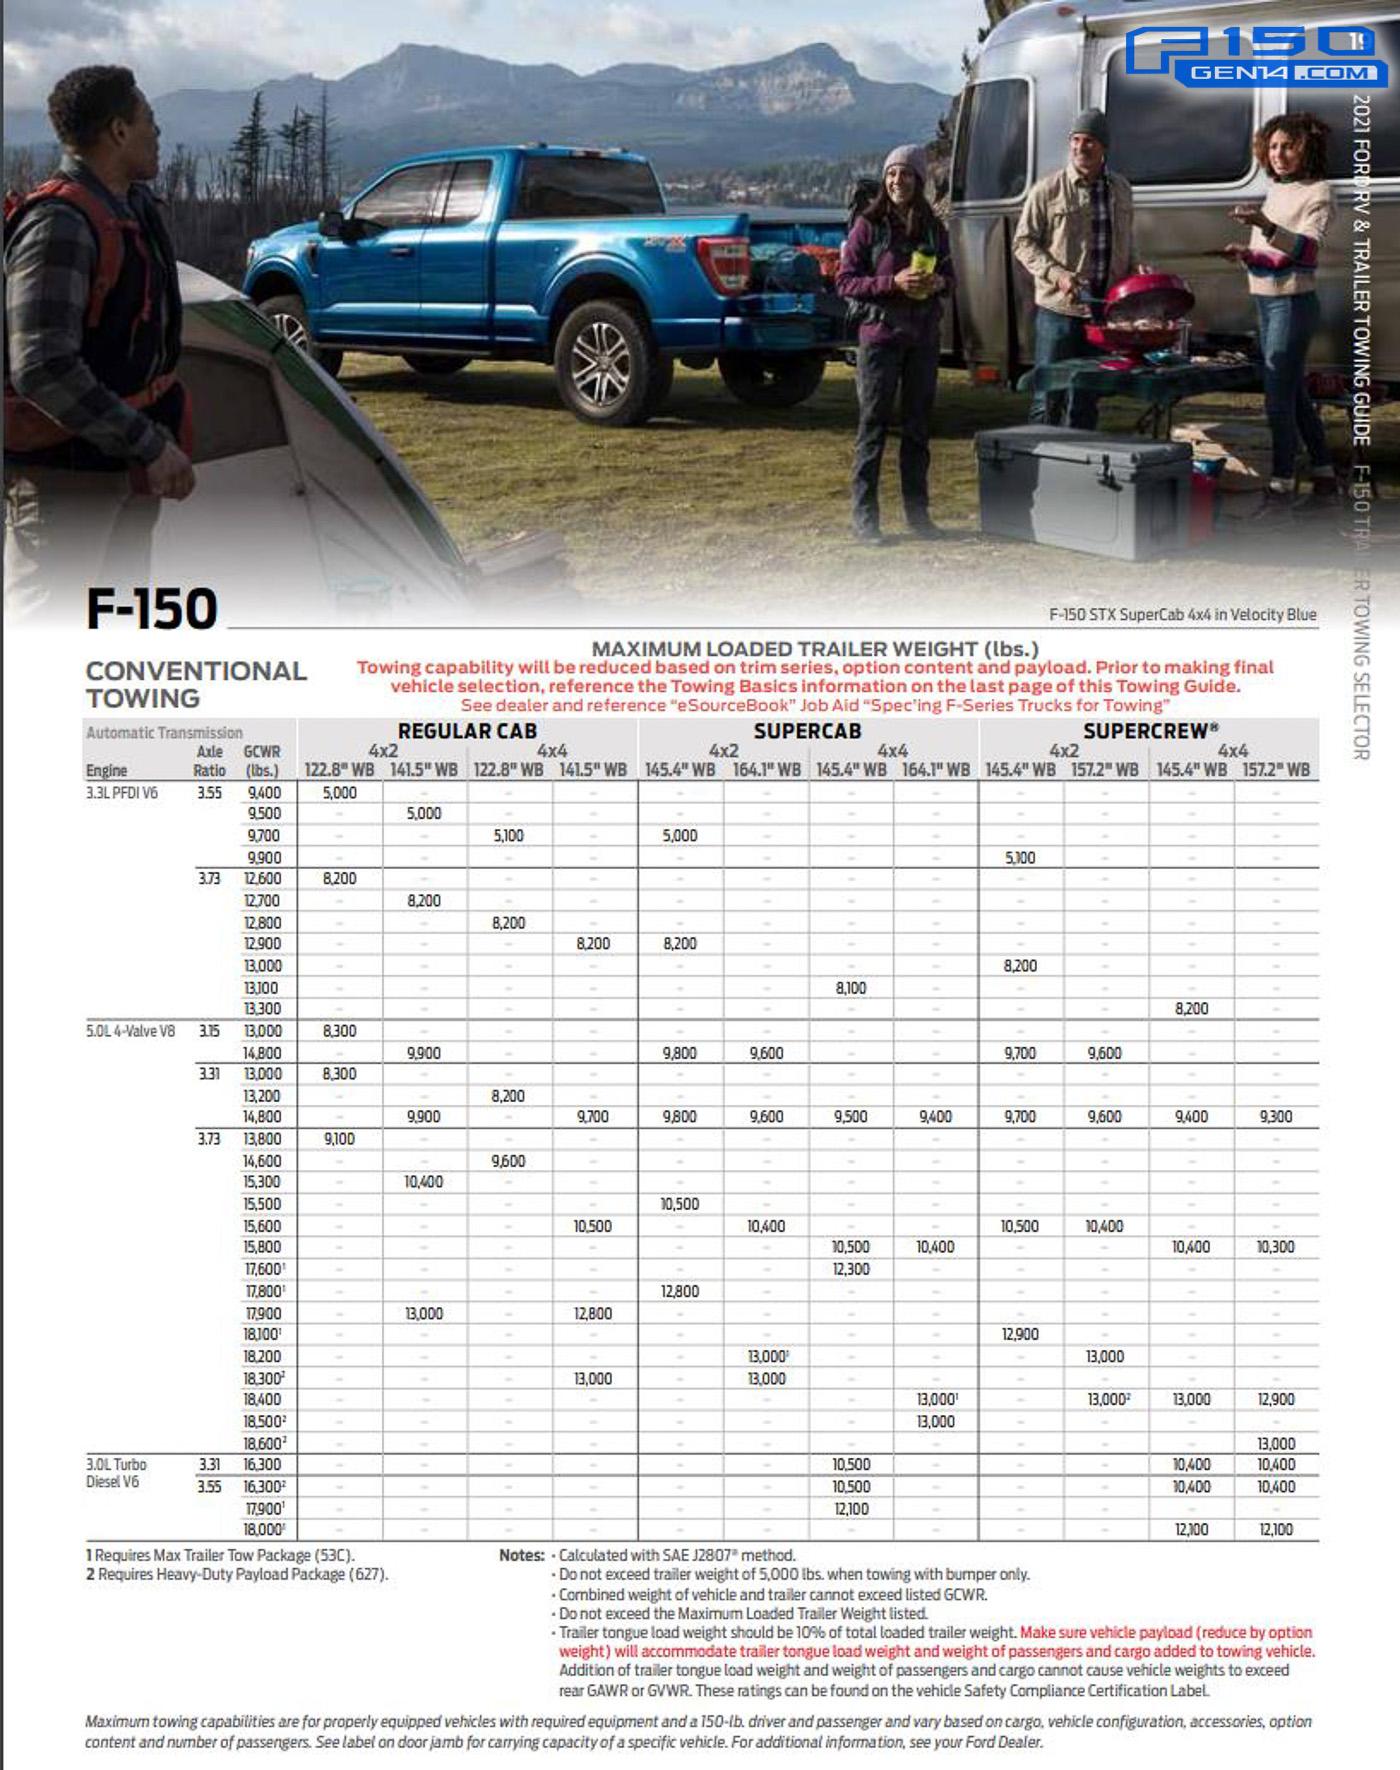 Ford F-150 Lightning 2021 F-150 Towing, 5th Wheel Towing and Cargo / Payload Capacity Figures 2021-F-150-Towing-Payload-Capacity-Guide-06